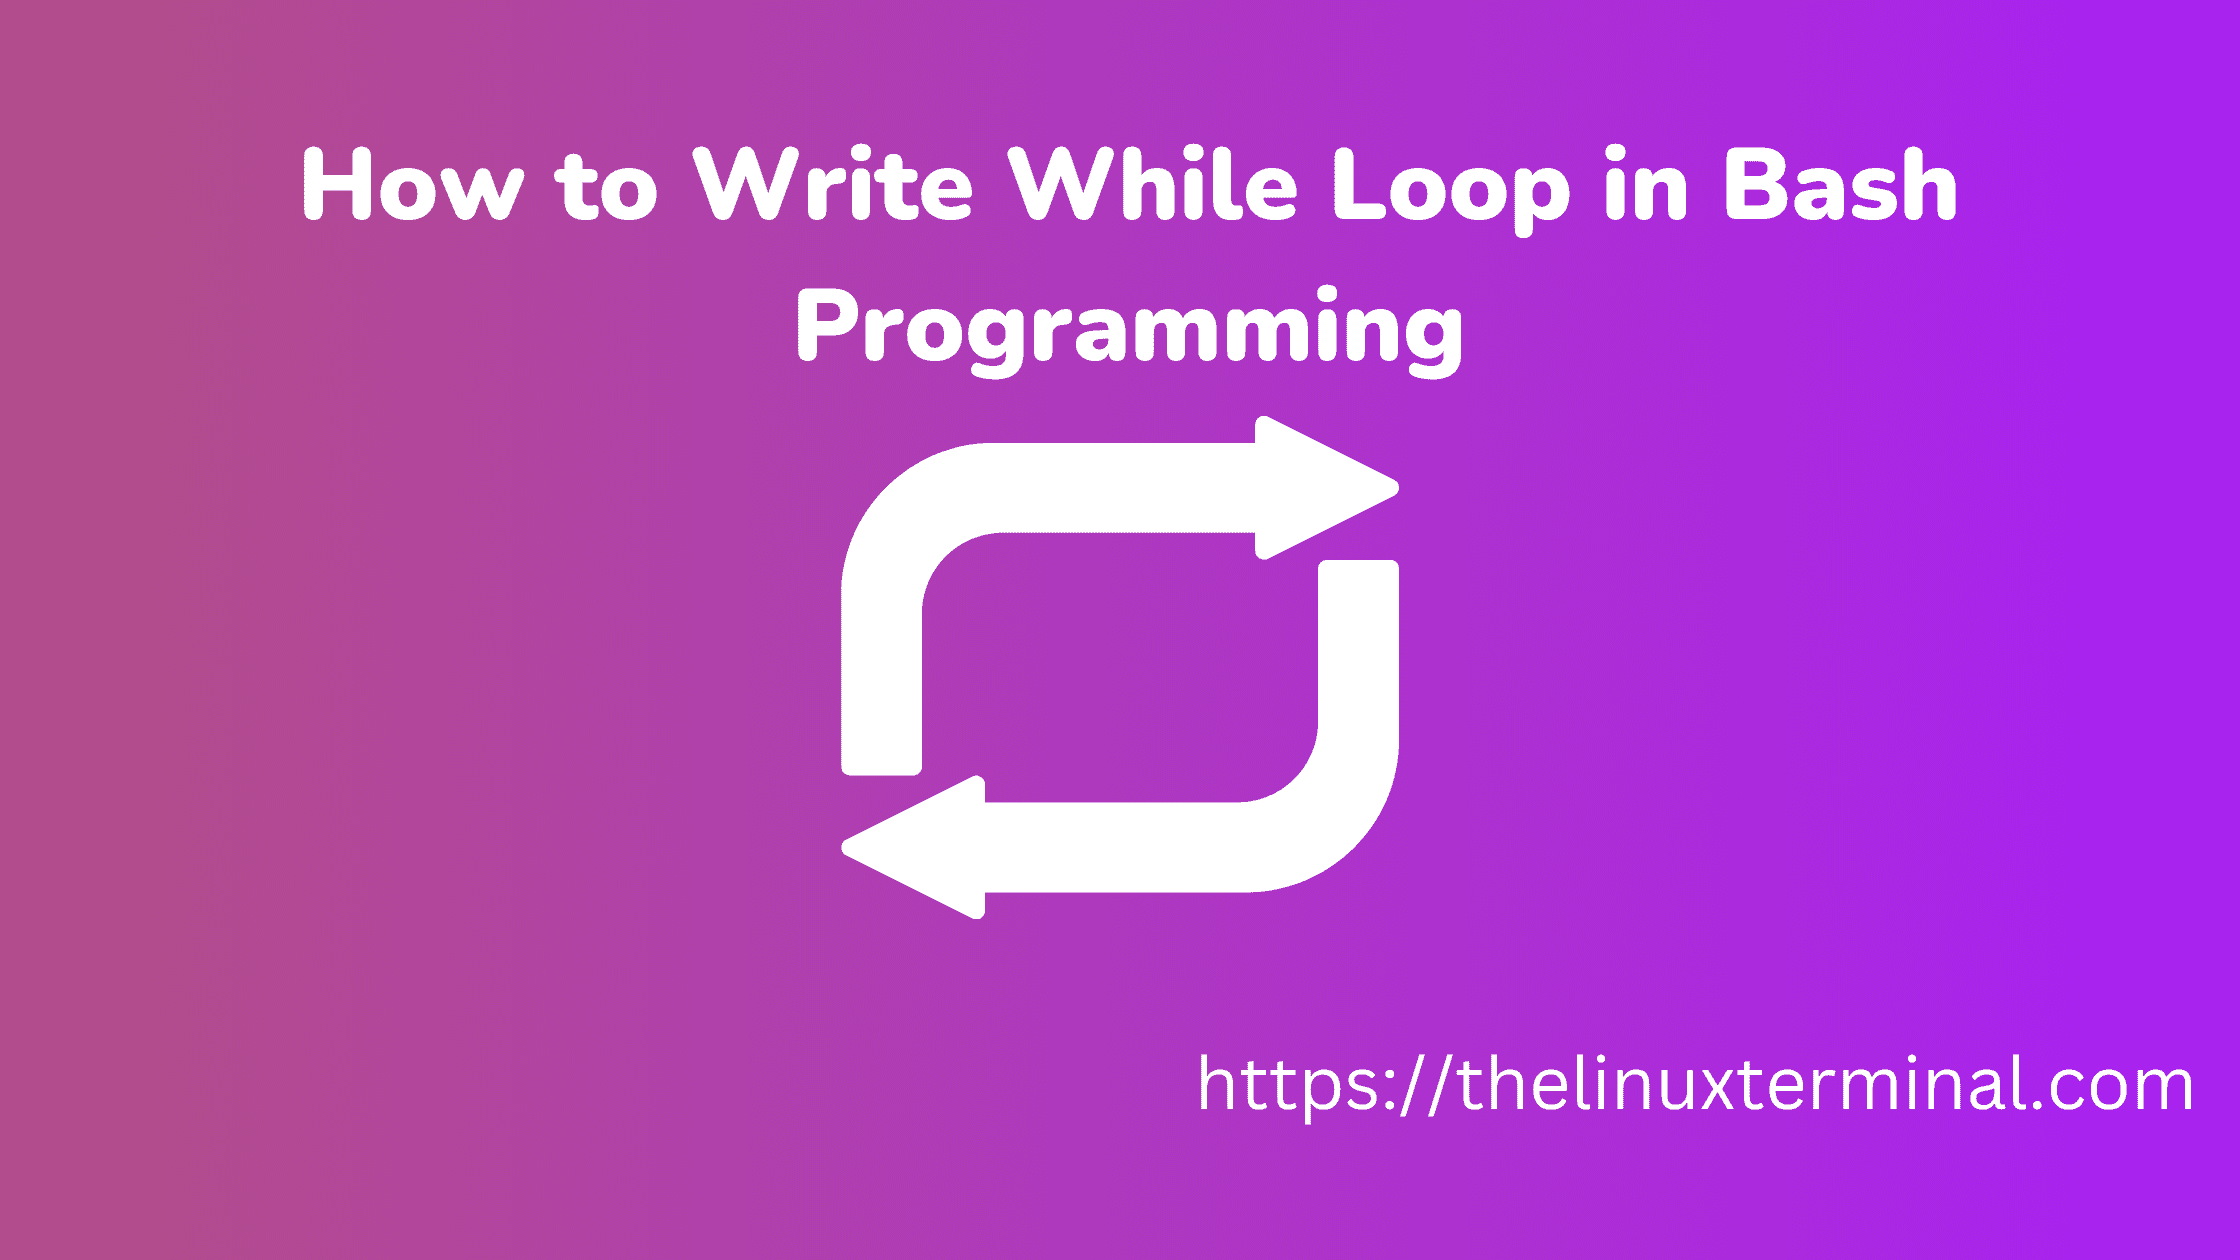 How to Write While Loop in Bash Programming